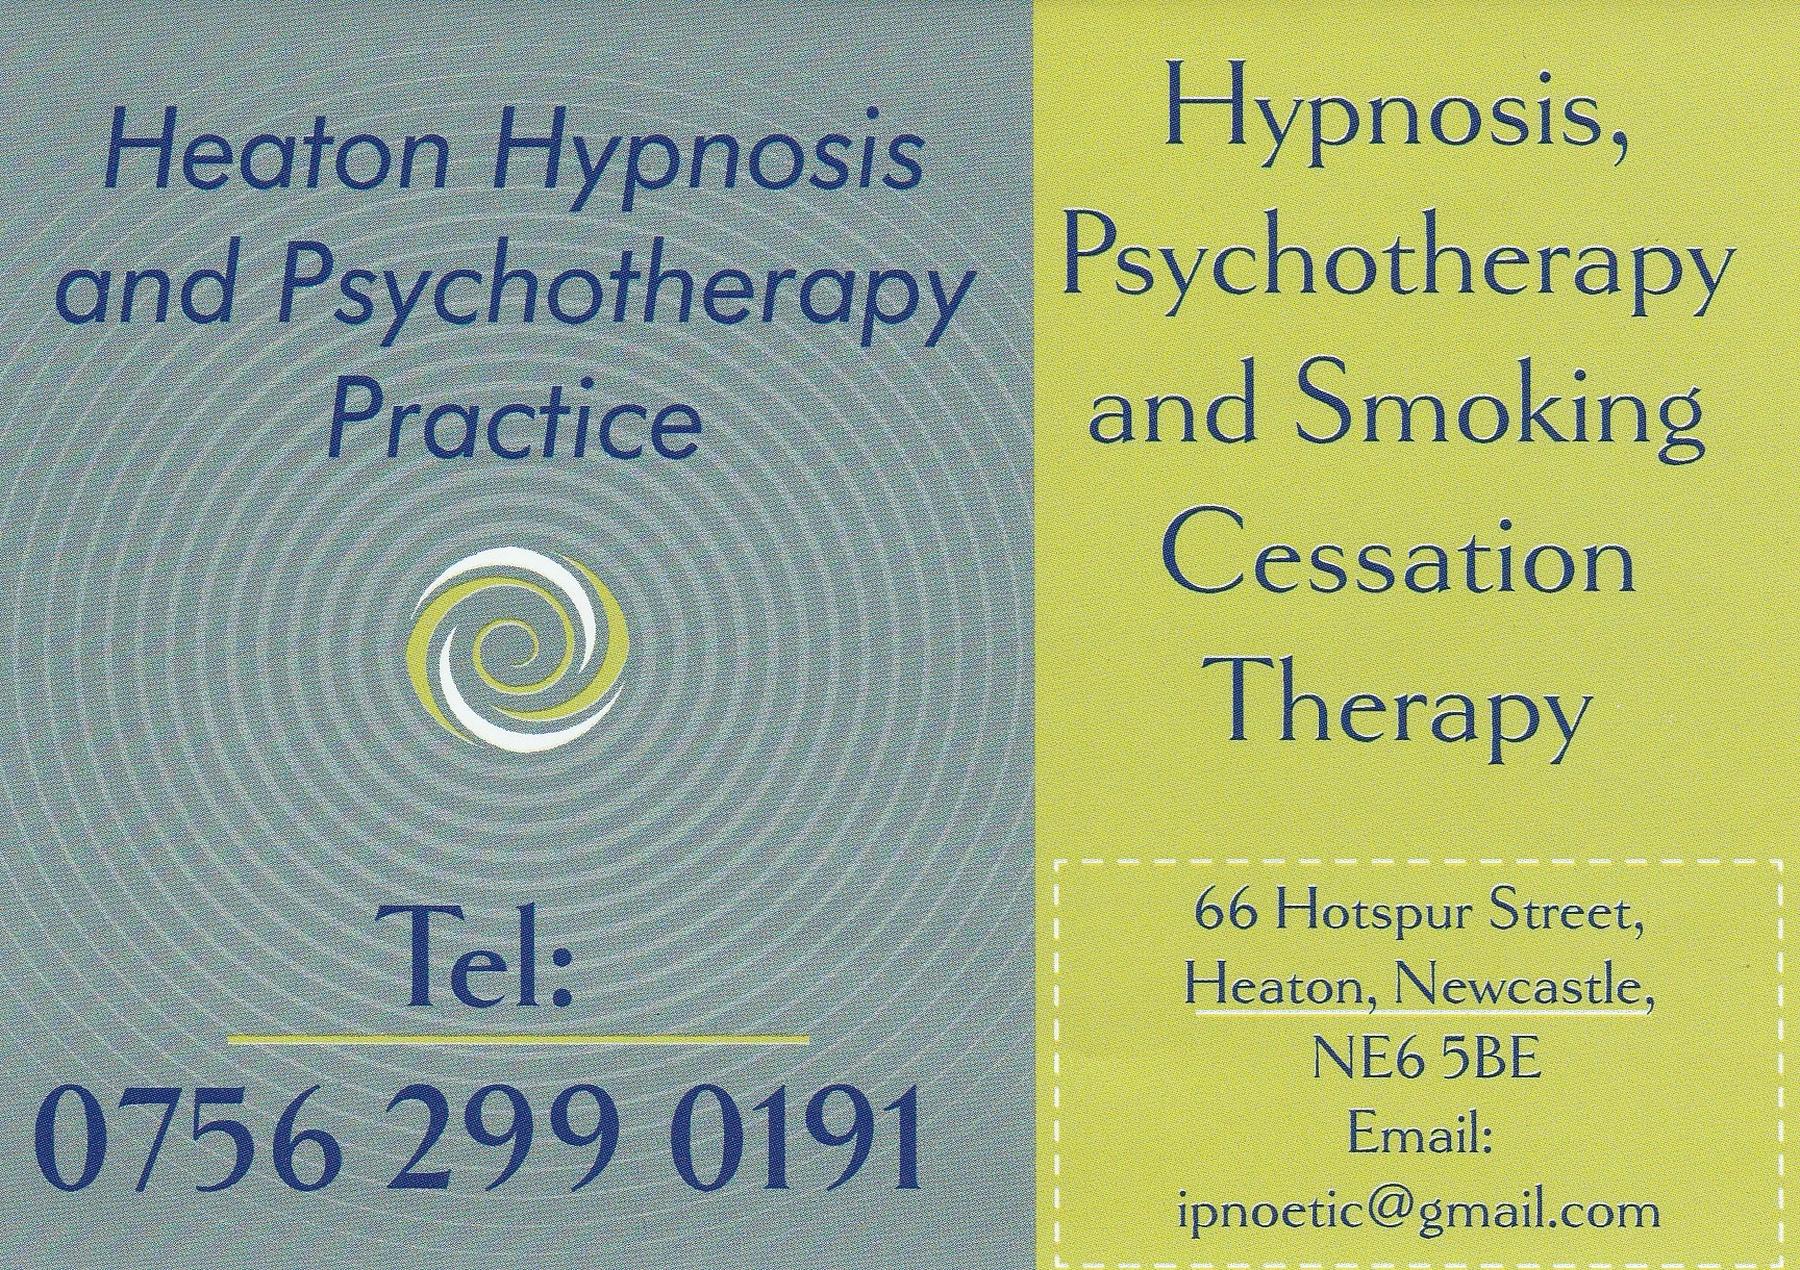 hypy hypychah hypychah hypychah hypychah hypychah hypychah h - File:Heaton hypnosis and psychotherap